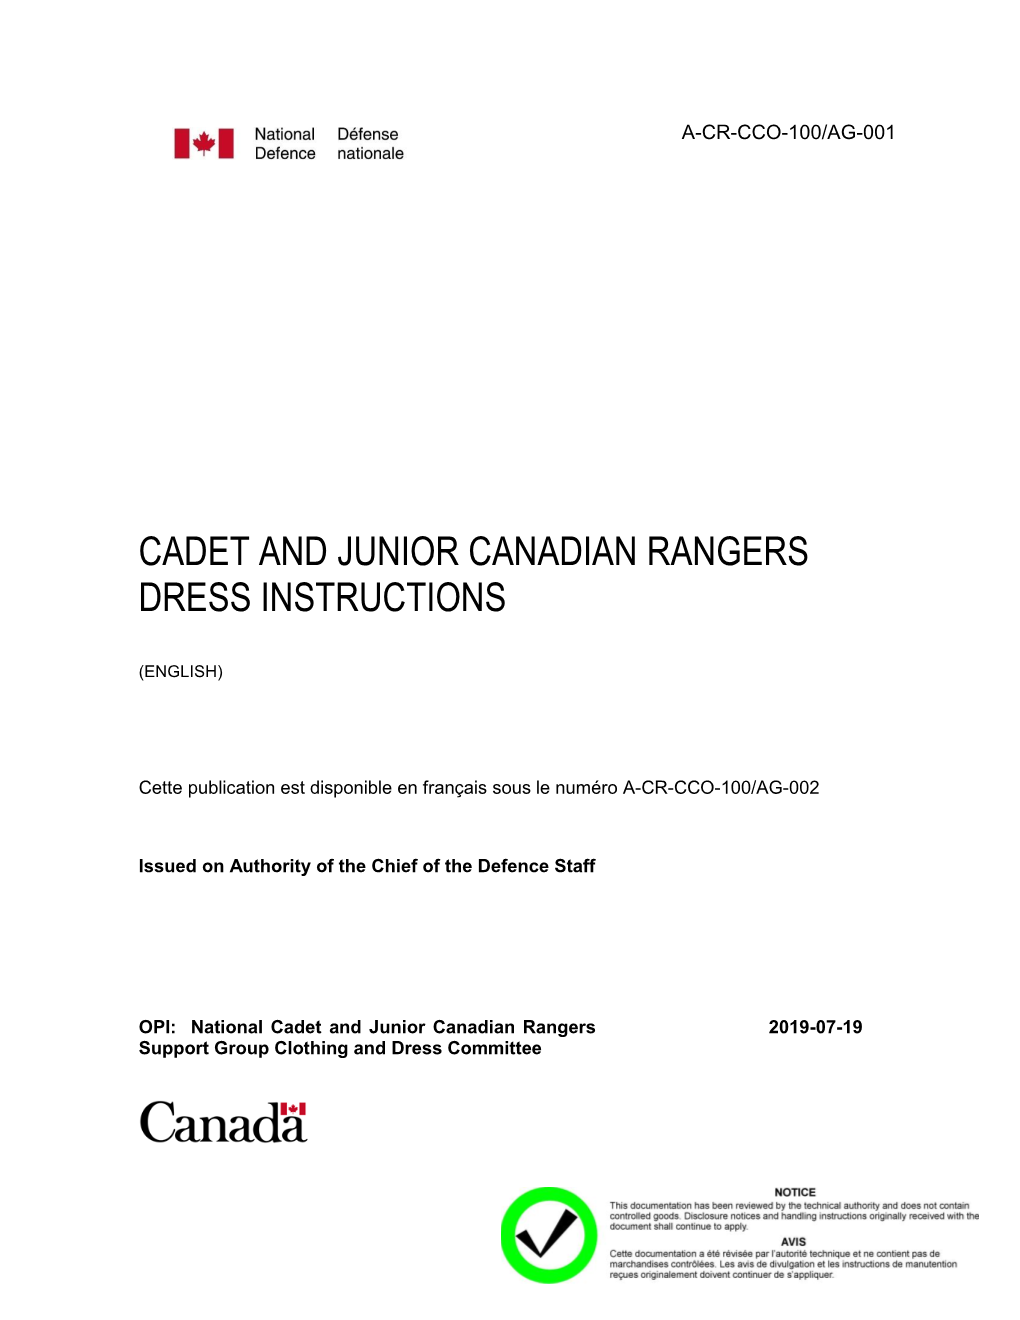 Cadet Dress Instructions and CATO 13-16, National Cadet Honours and Awards